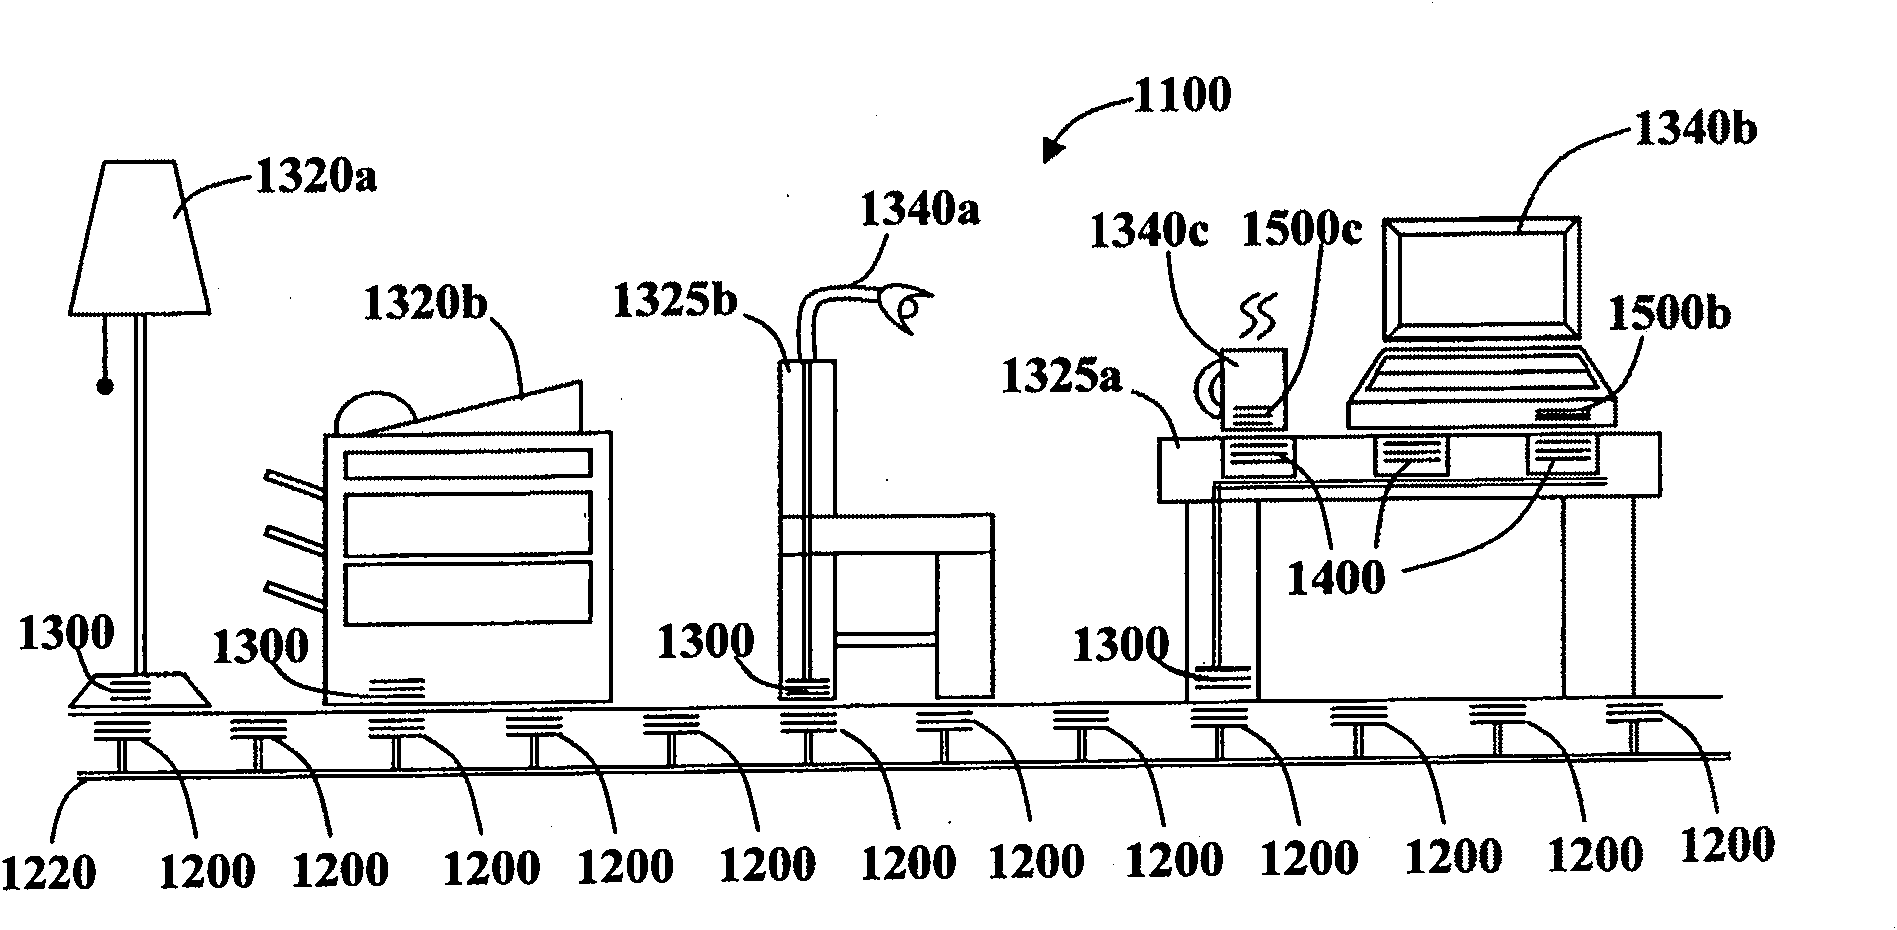 Inductive power providing system